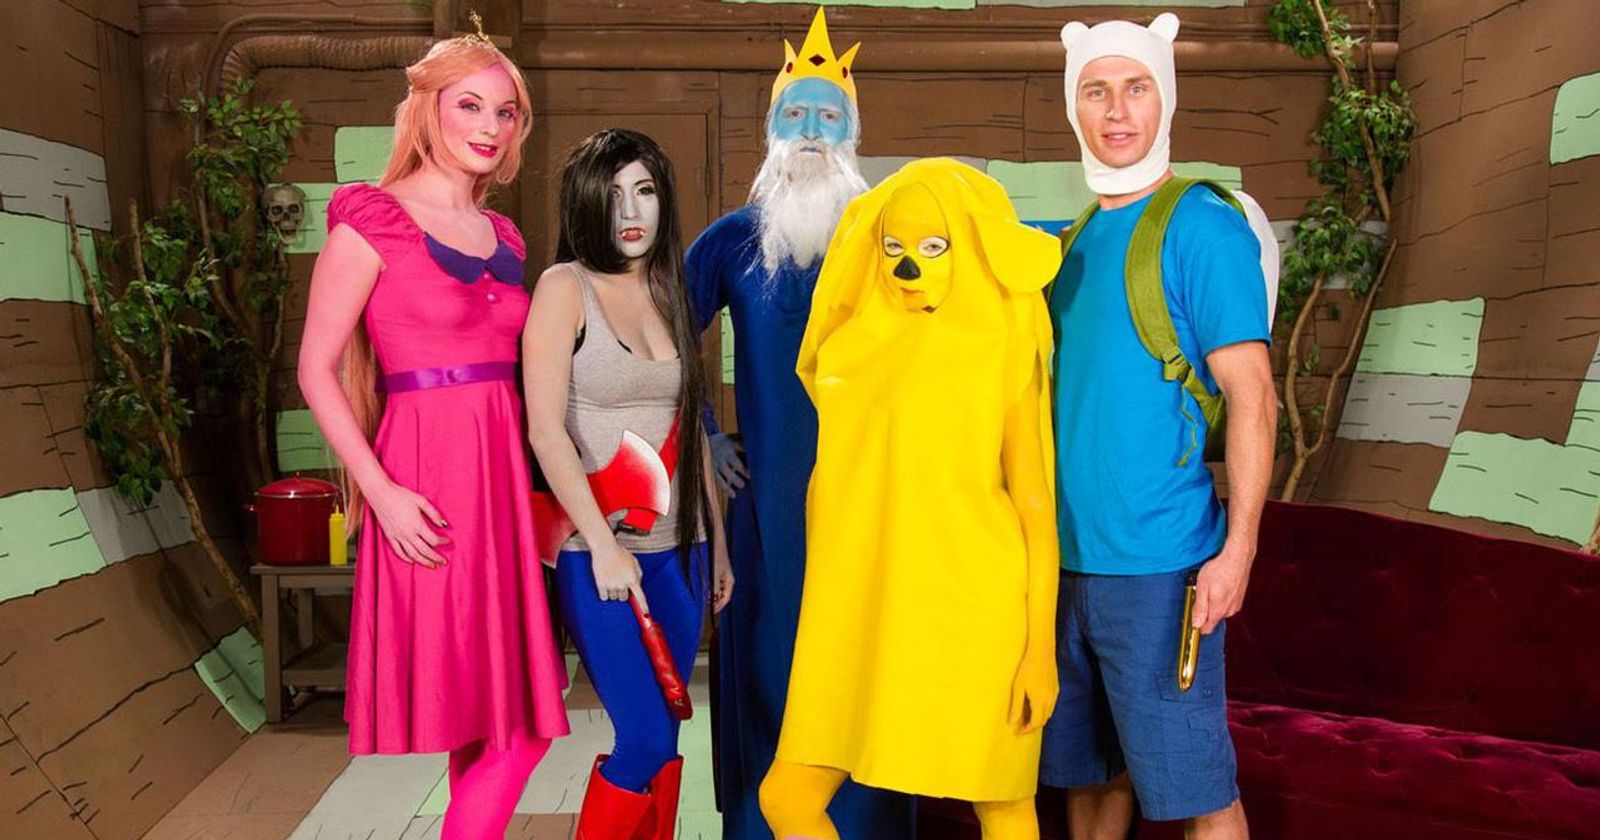 Adventure Time Cosplay Porn - There's Now An Adventure Time Porn Parody, and It's Outrageous As It Sounds